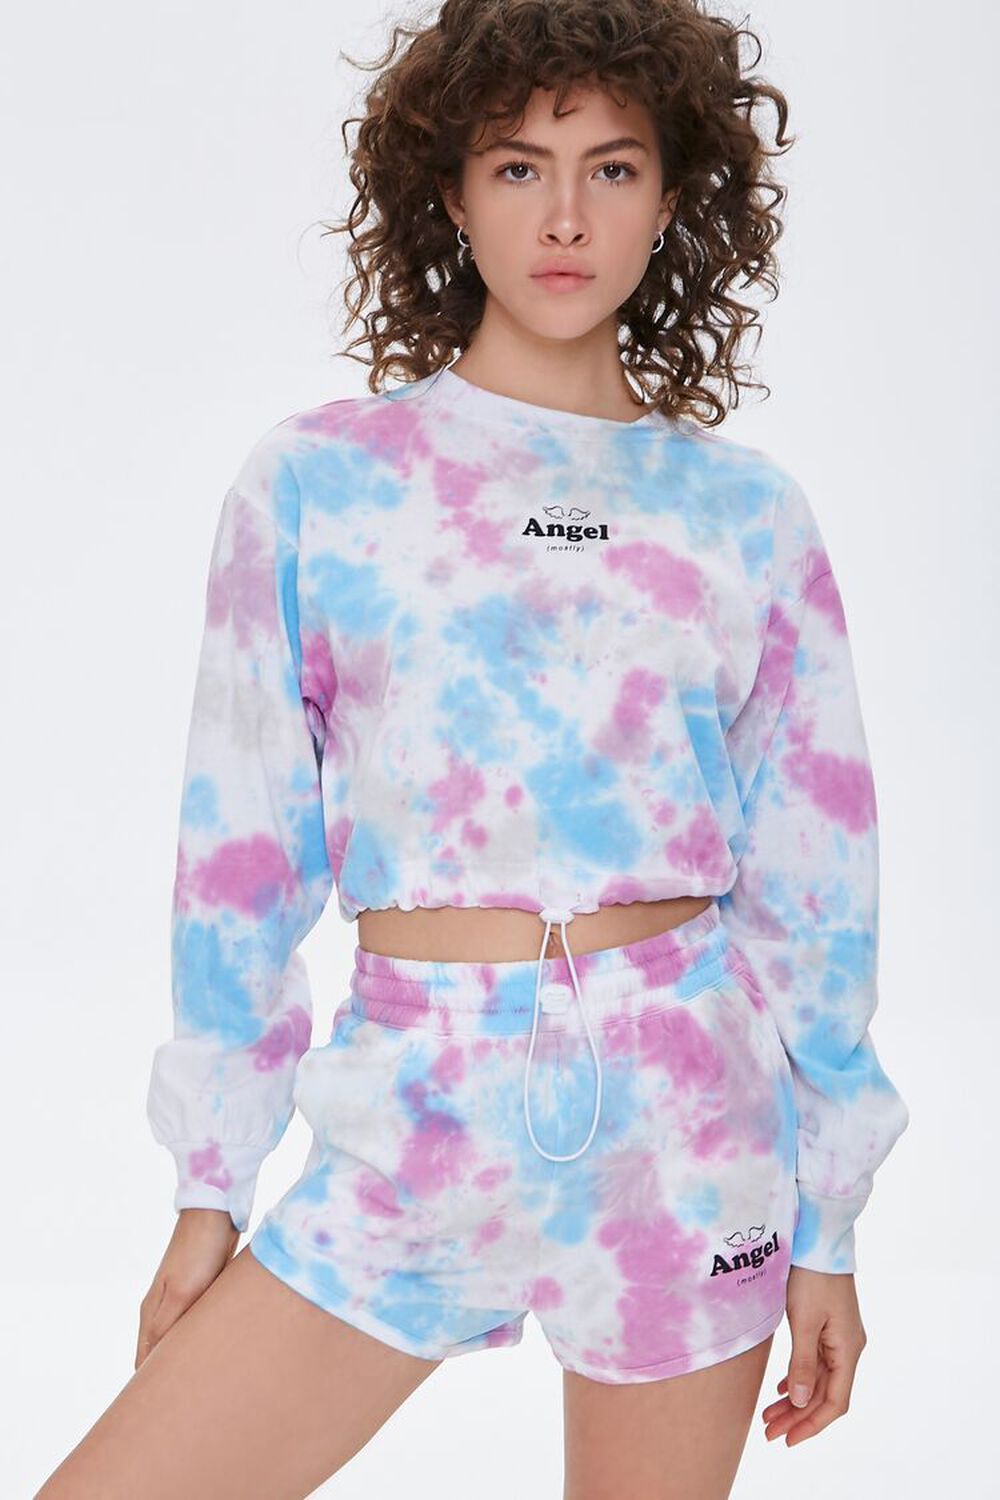 PINK/BLUE Tie-Dye Angel Graphic Shorts, image 1